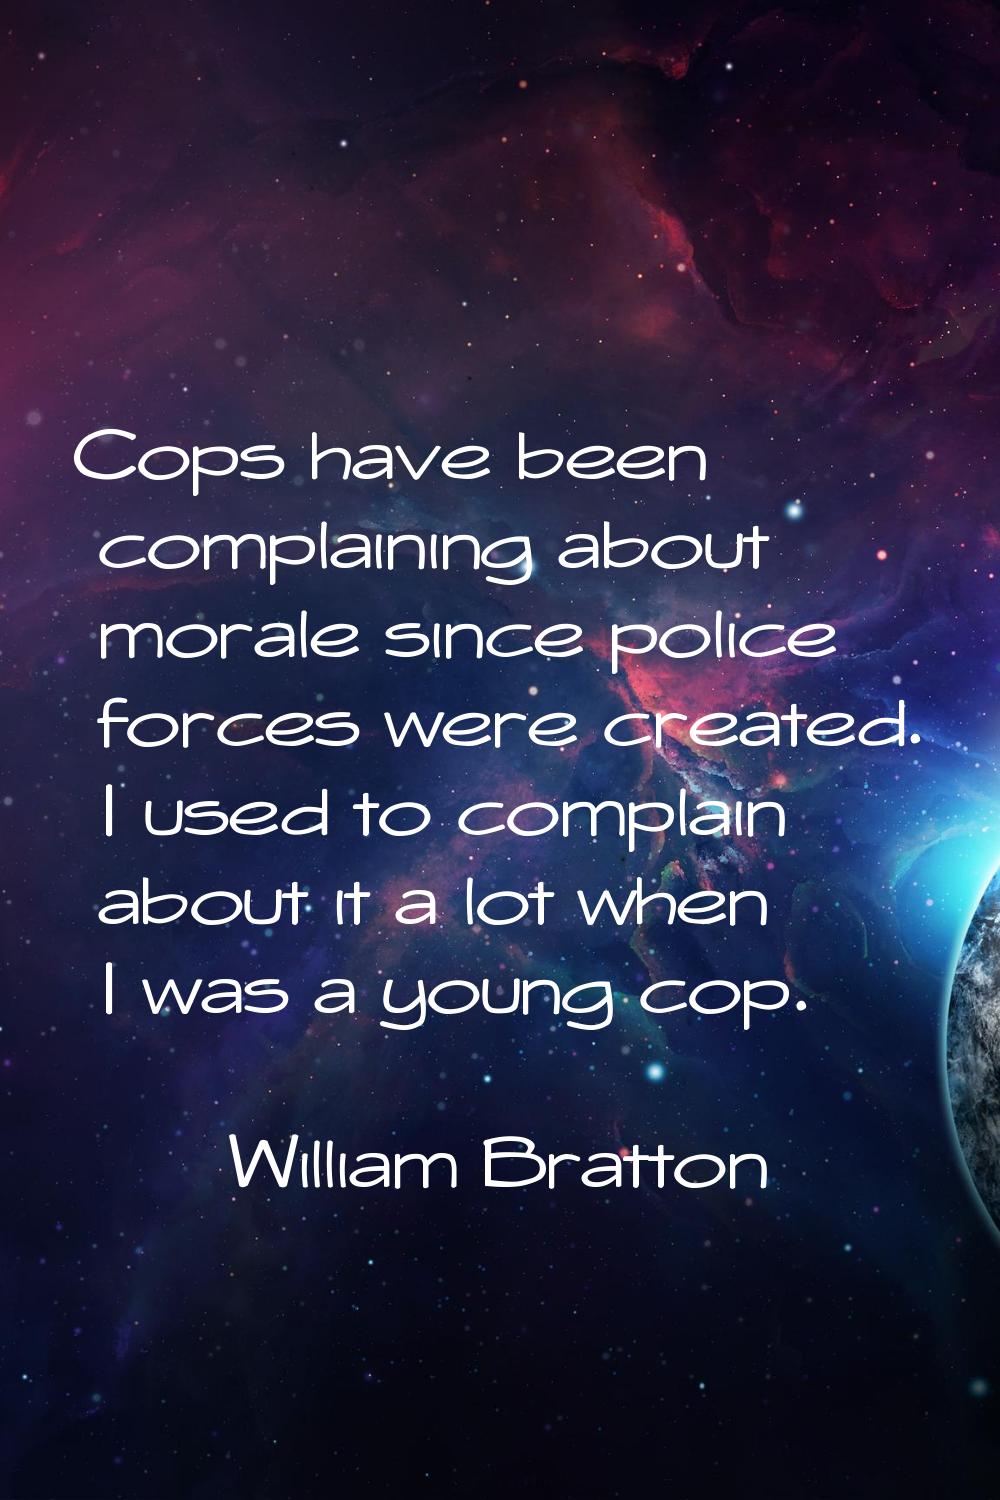 Cops have been complaining about morale since police forces were created. I used to complain about 